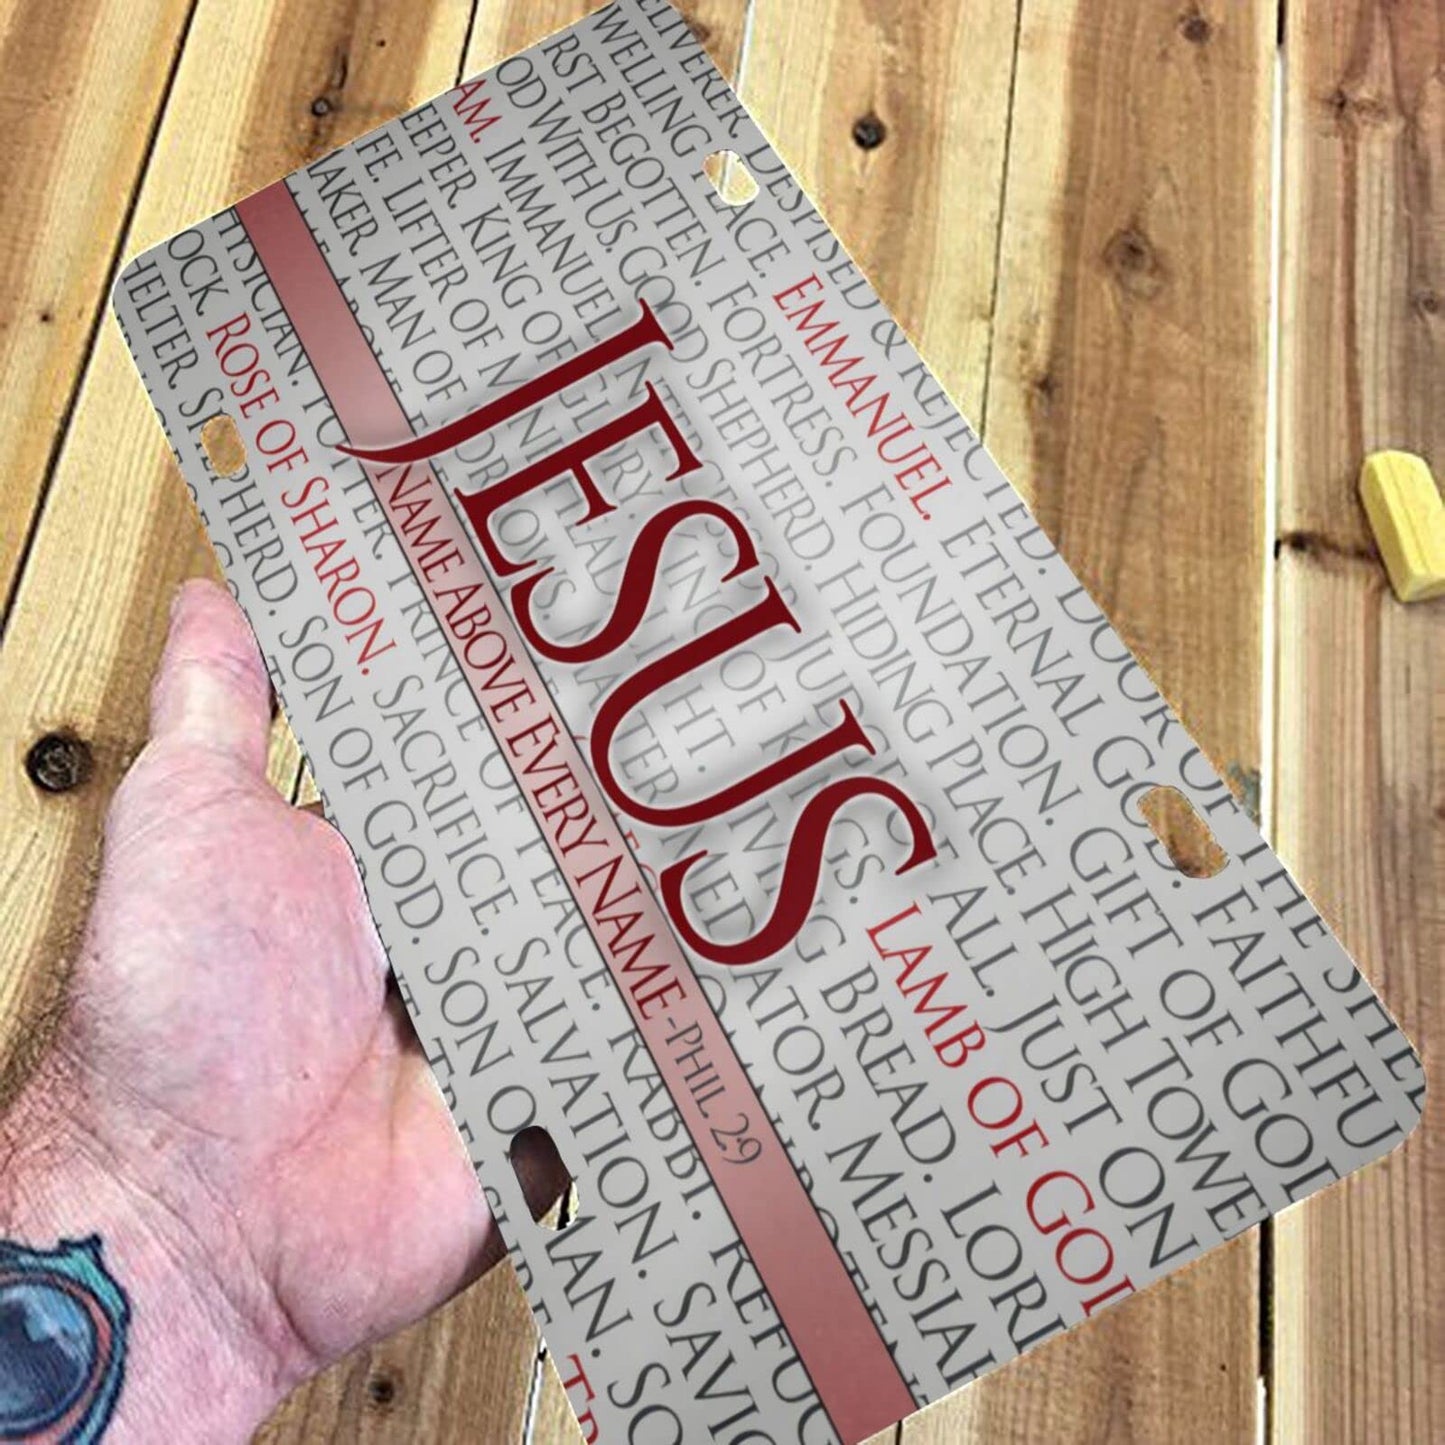 Jesus & The Names Of Jesus Christian Front License Plate 6*12in/15*30cm (4 Holes) claimedbygoddesigns